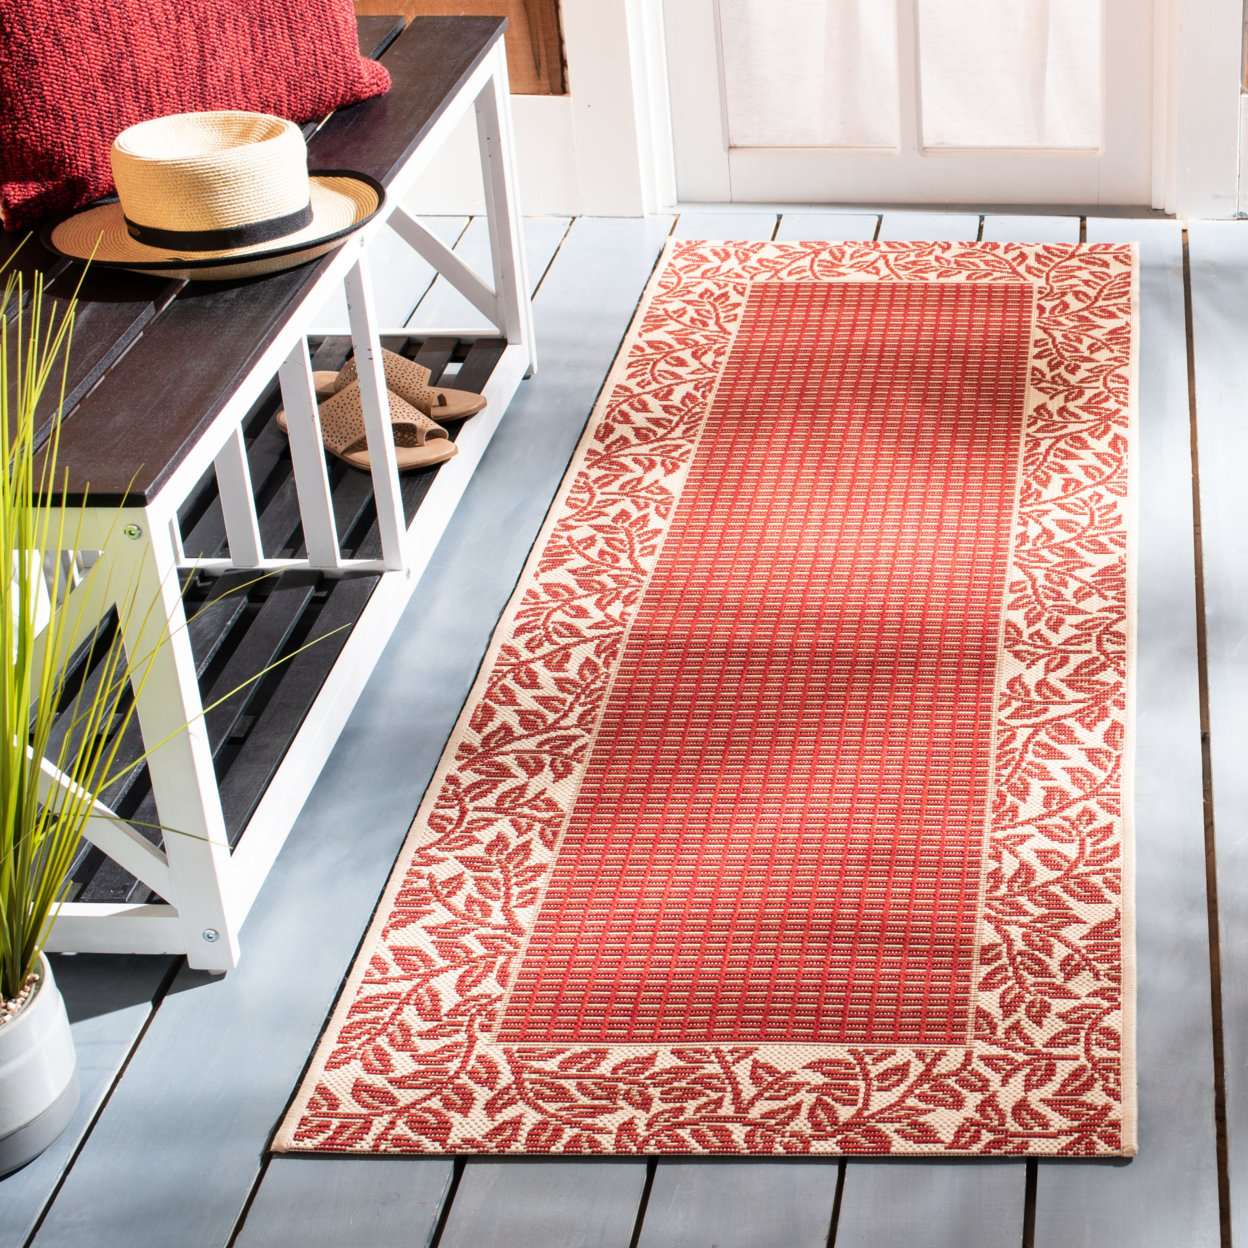 SAFAVIEH Courtyard CY0727-3707 Red / Natural Rug - 2' 3 X 10'